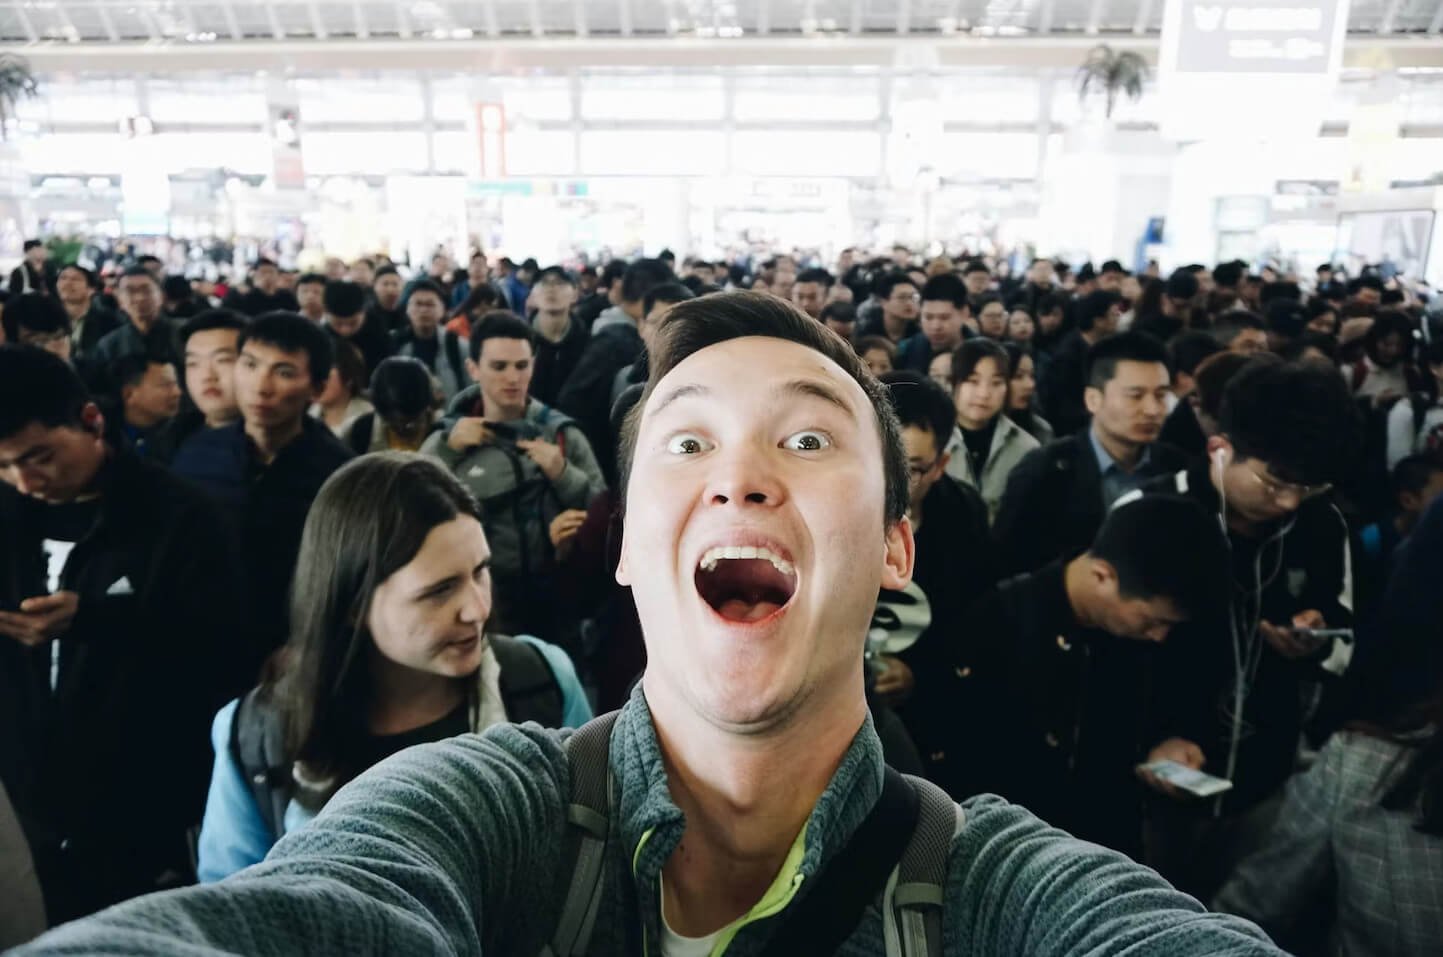 Nathan at a very crowded train station in China.